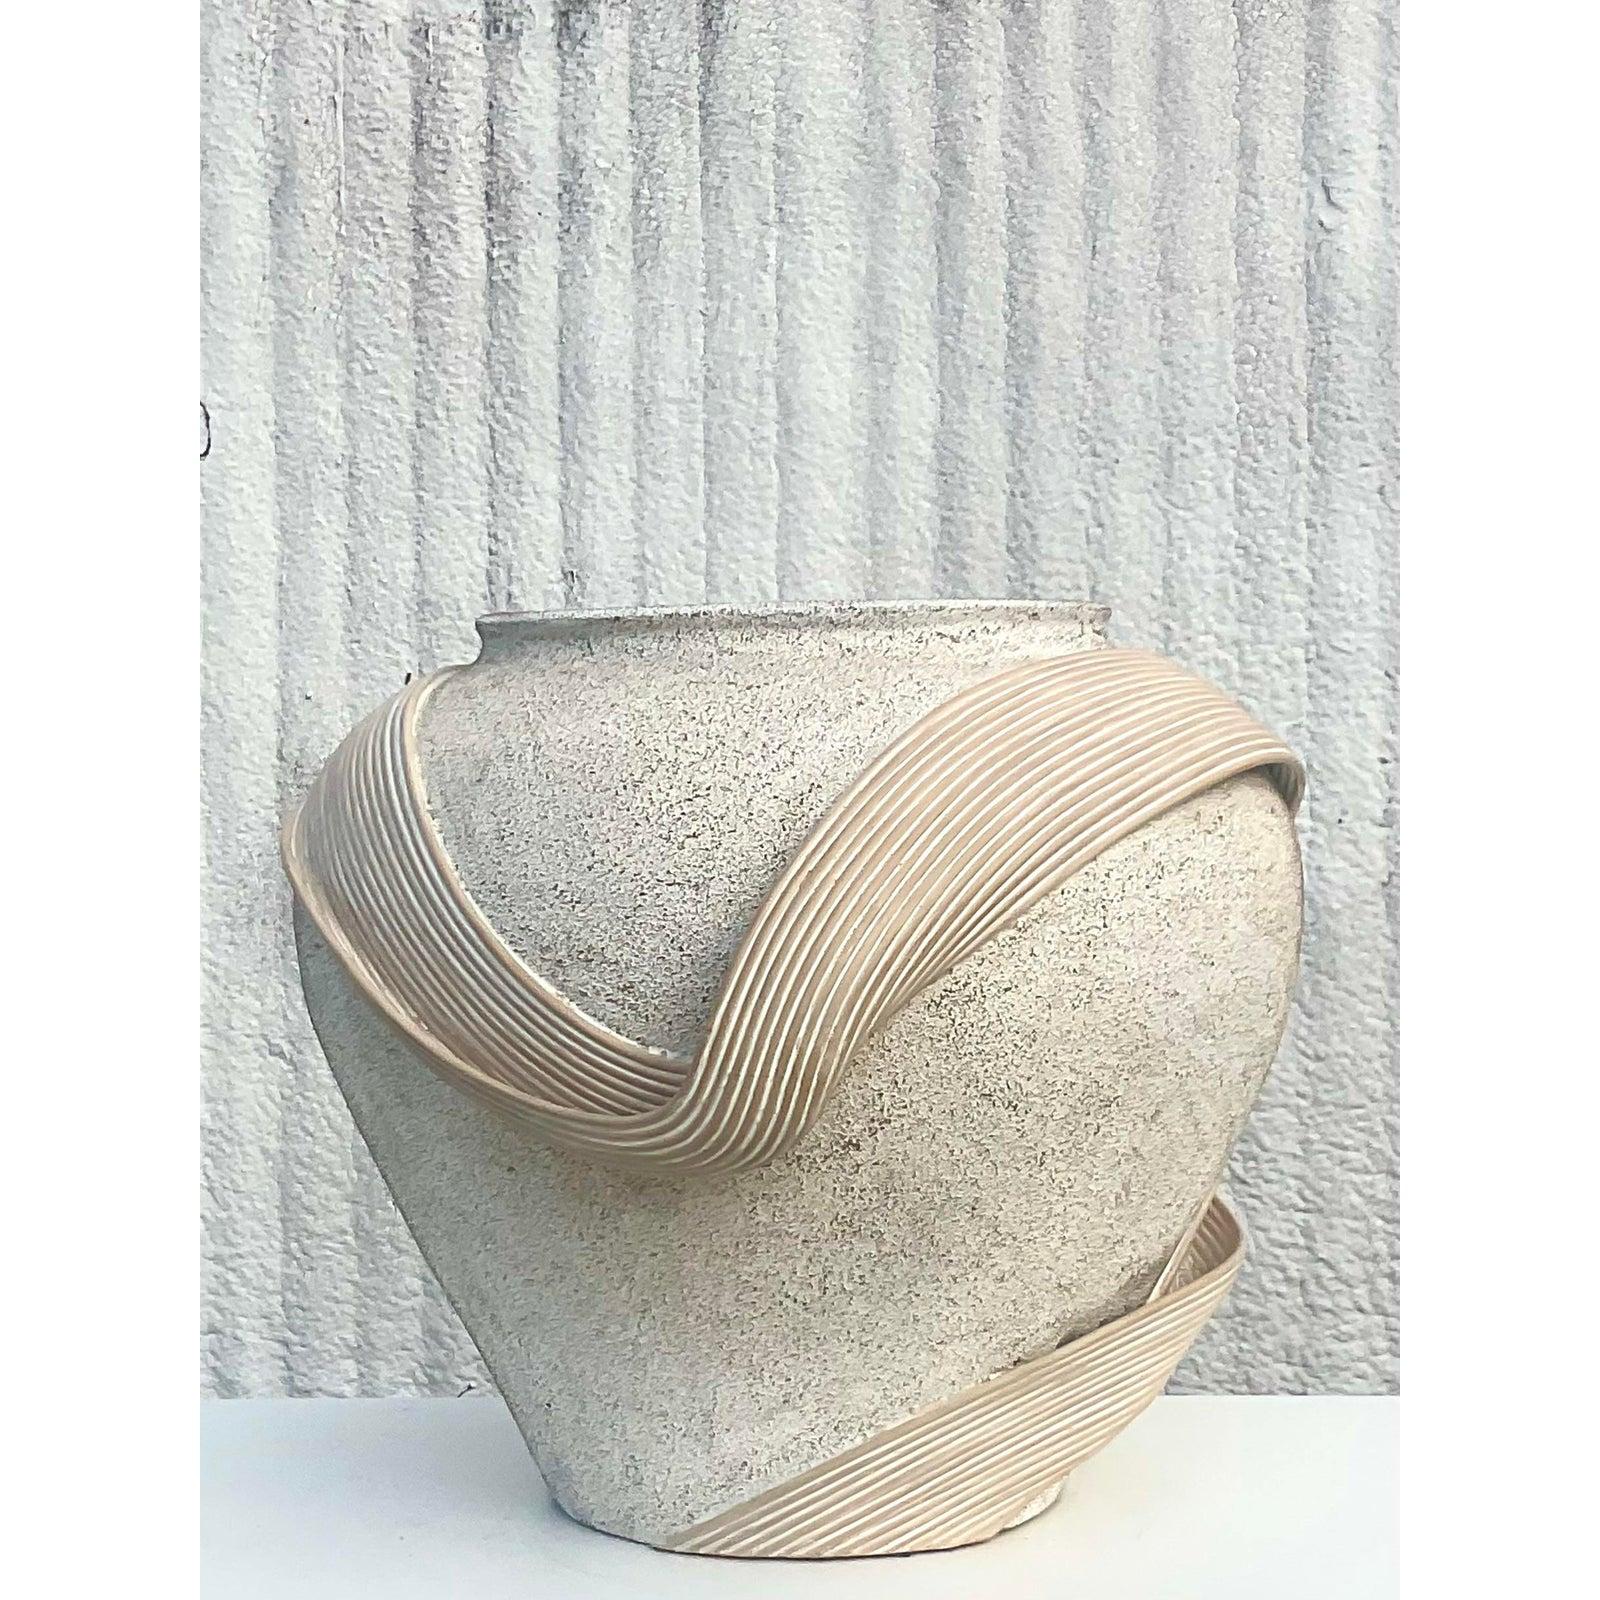 Stunning vintage Coastal urn. A monumental plaster urn with a chic band of pencil reed wrapped around like a ribbon. Large and impressive. Dine in the manner of Betty Copuncpue. Acquired from a Palm Beach estate.